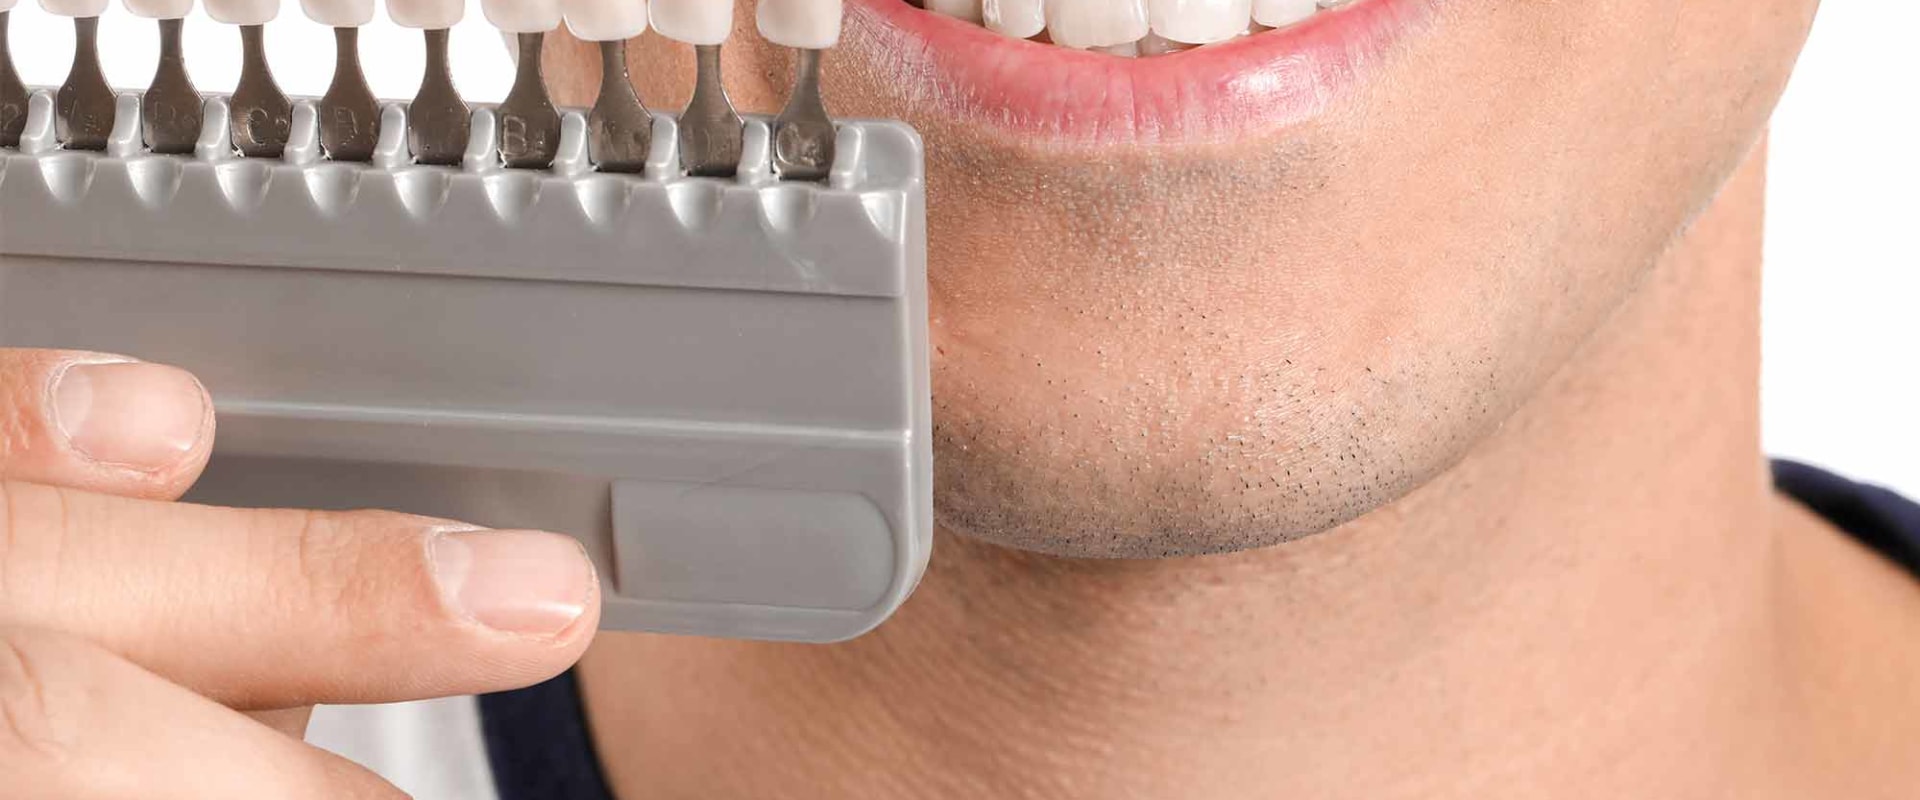 Hydrogen Peroxide: What You Need to Know About Teeth Whitening Products